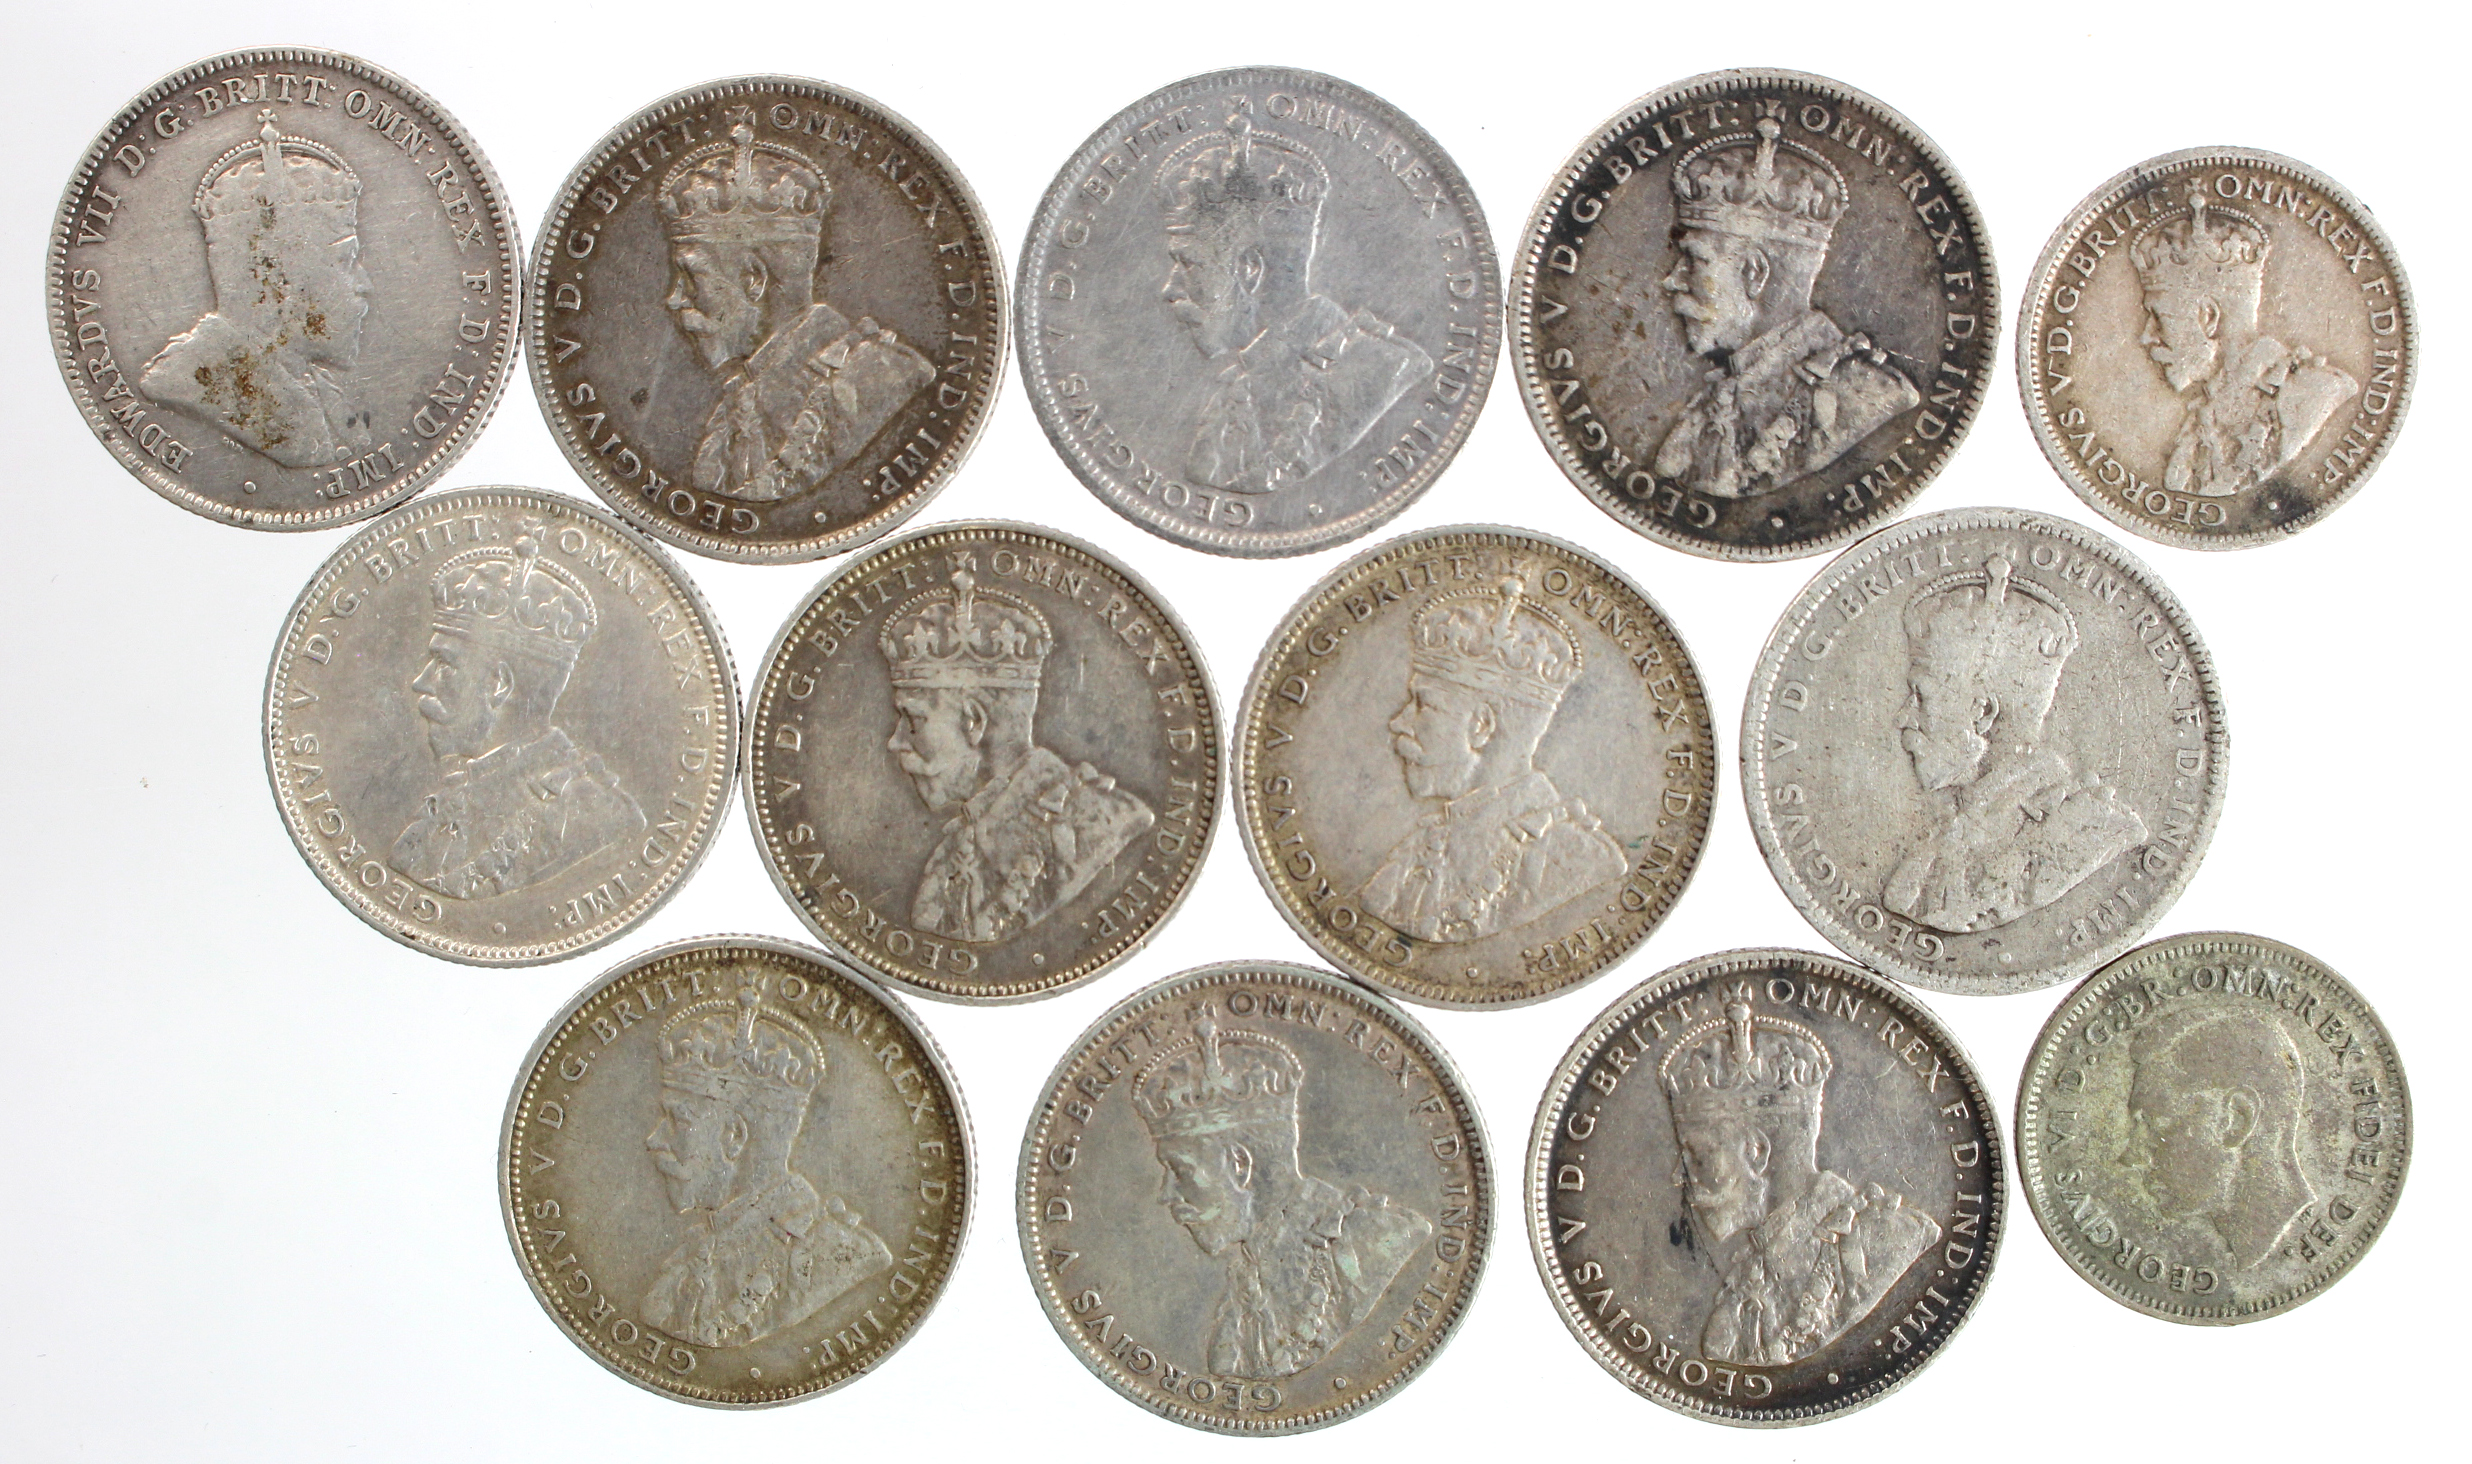 Australia silver Shillings (11) and Sixpences (2), 1910 to 1951 various, mixed grade.